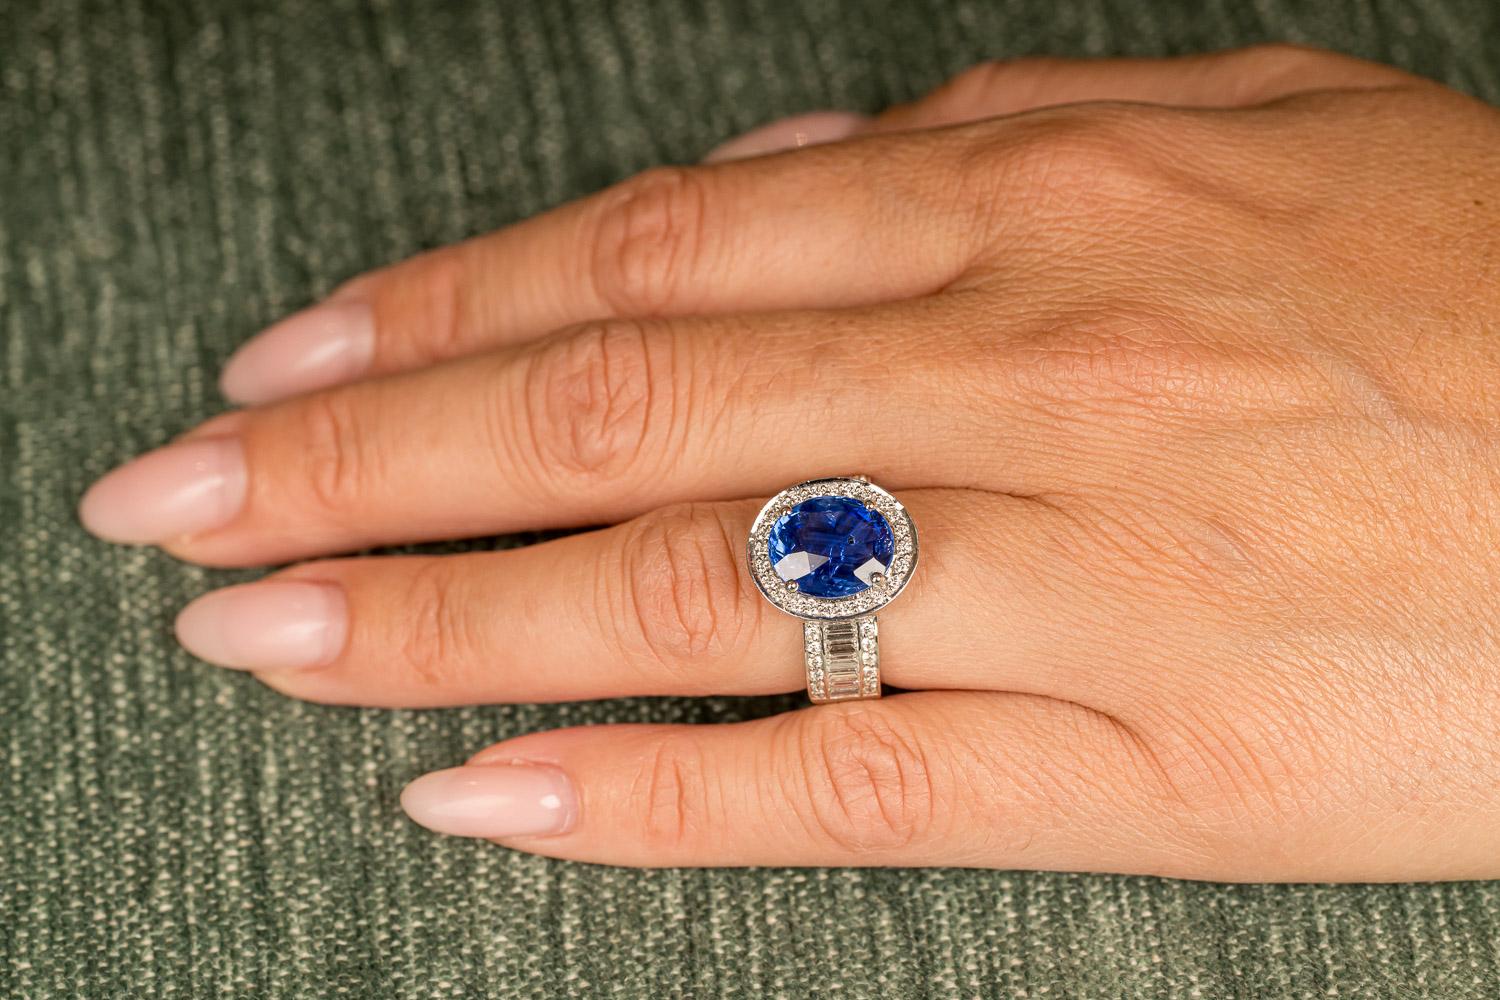 One of a kind ring in 18-karat white gold 11,7g set with 1 natural, eye clean, Ceylon blue sapphire in oval cut 5.53 Carat, 12 diamonds in baguette cut 0.74Ct and 48 brilliant cut diamonds 0.48 Carat in Loop clean D quality).

Because every sapphire